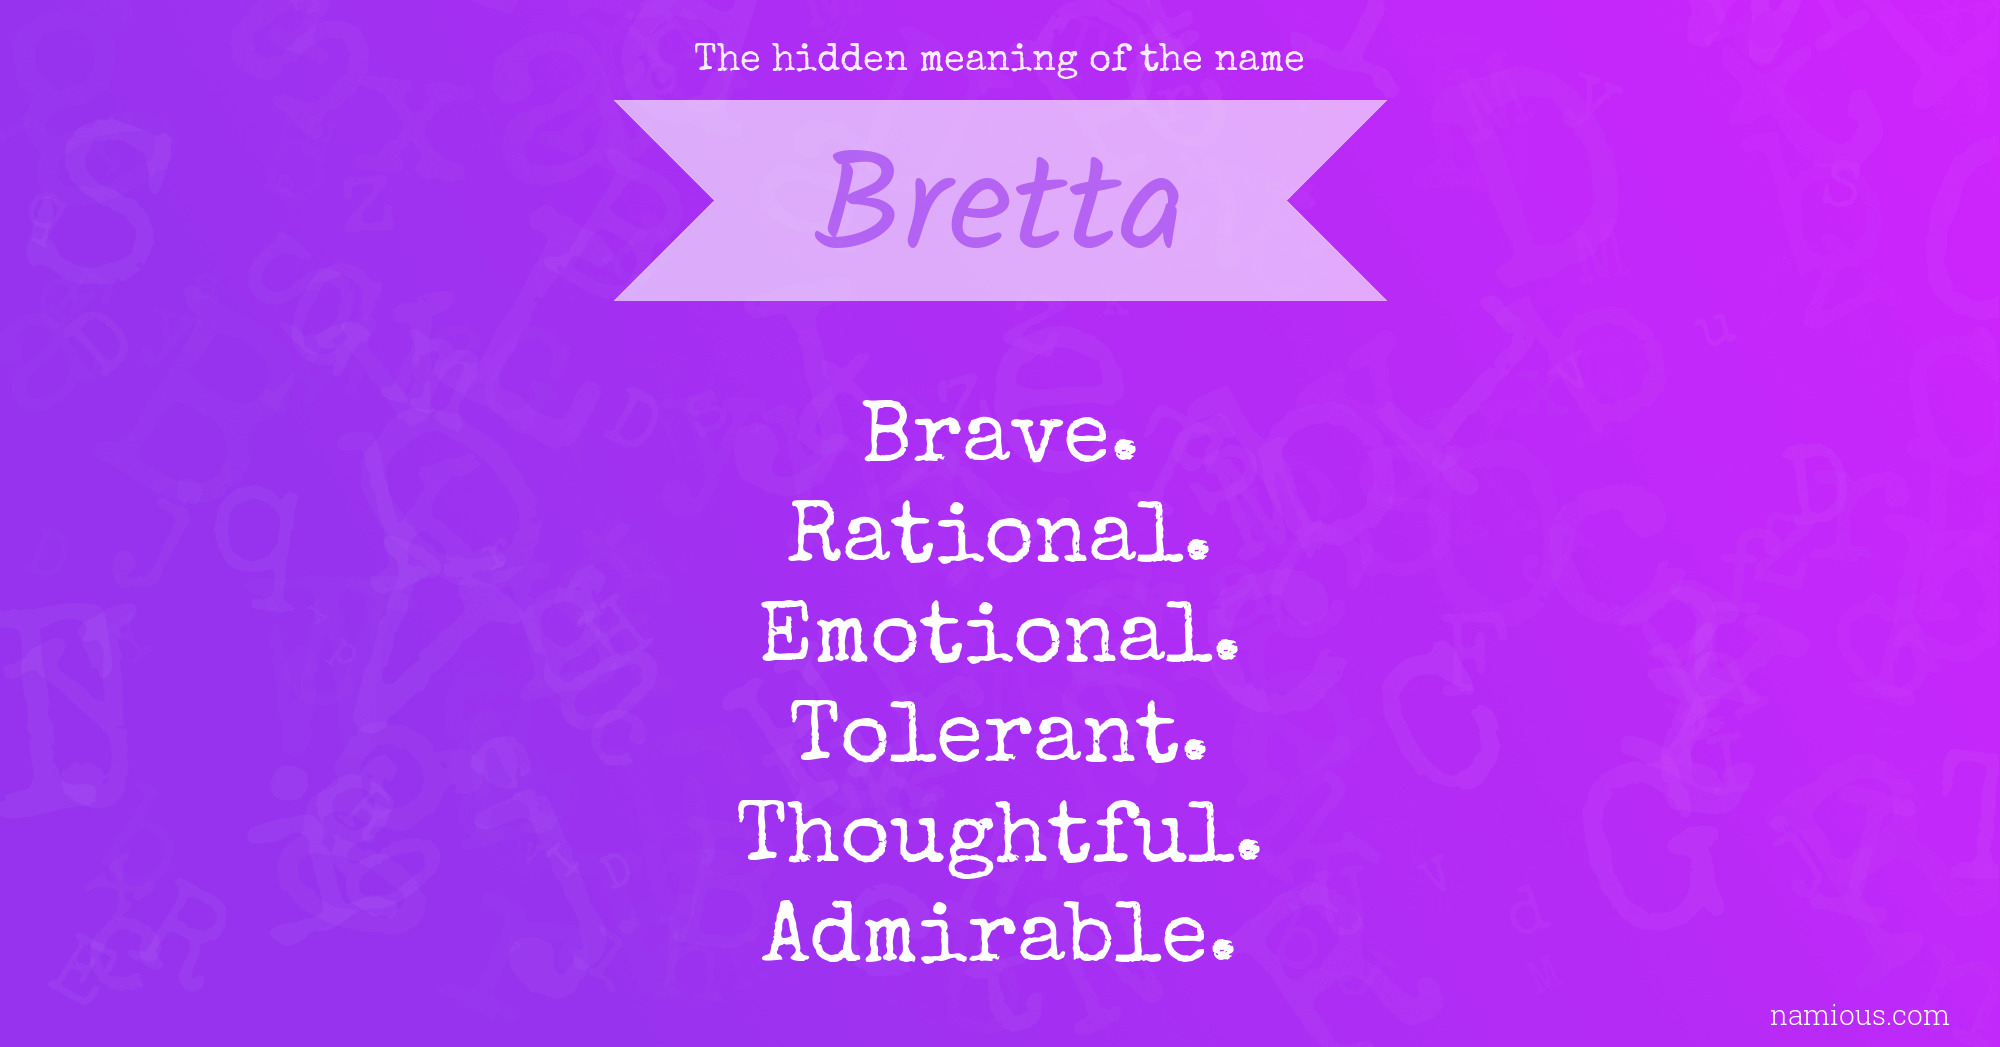 The hidden meaning of the name Bretta